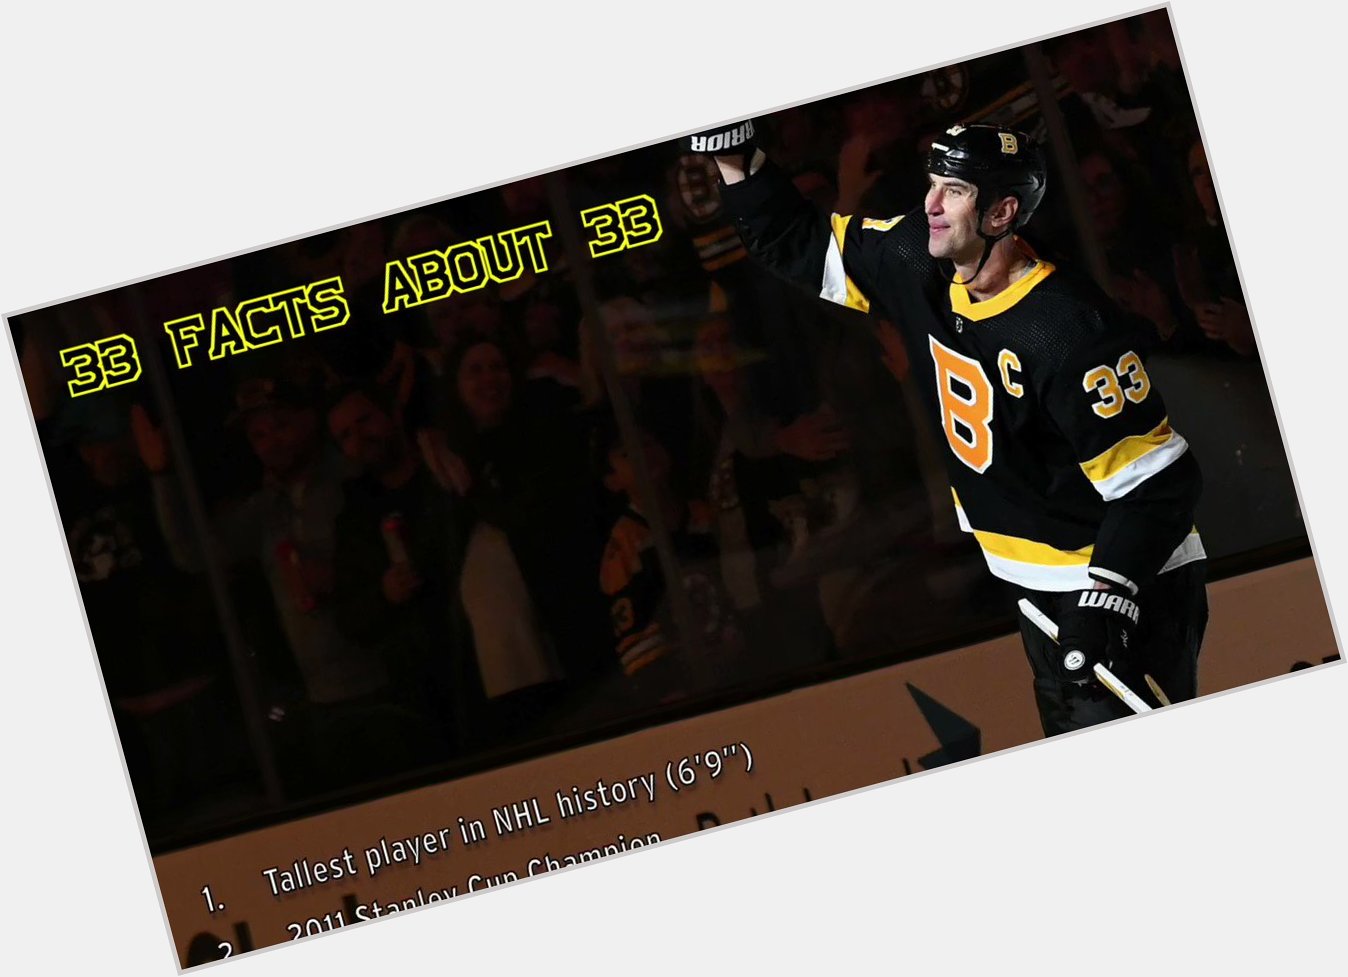 Happy 43rd birthday, Zdeno Chara! 

Here are 33 facts about No. 33 for his special day. 